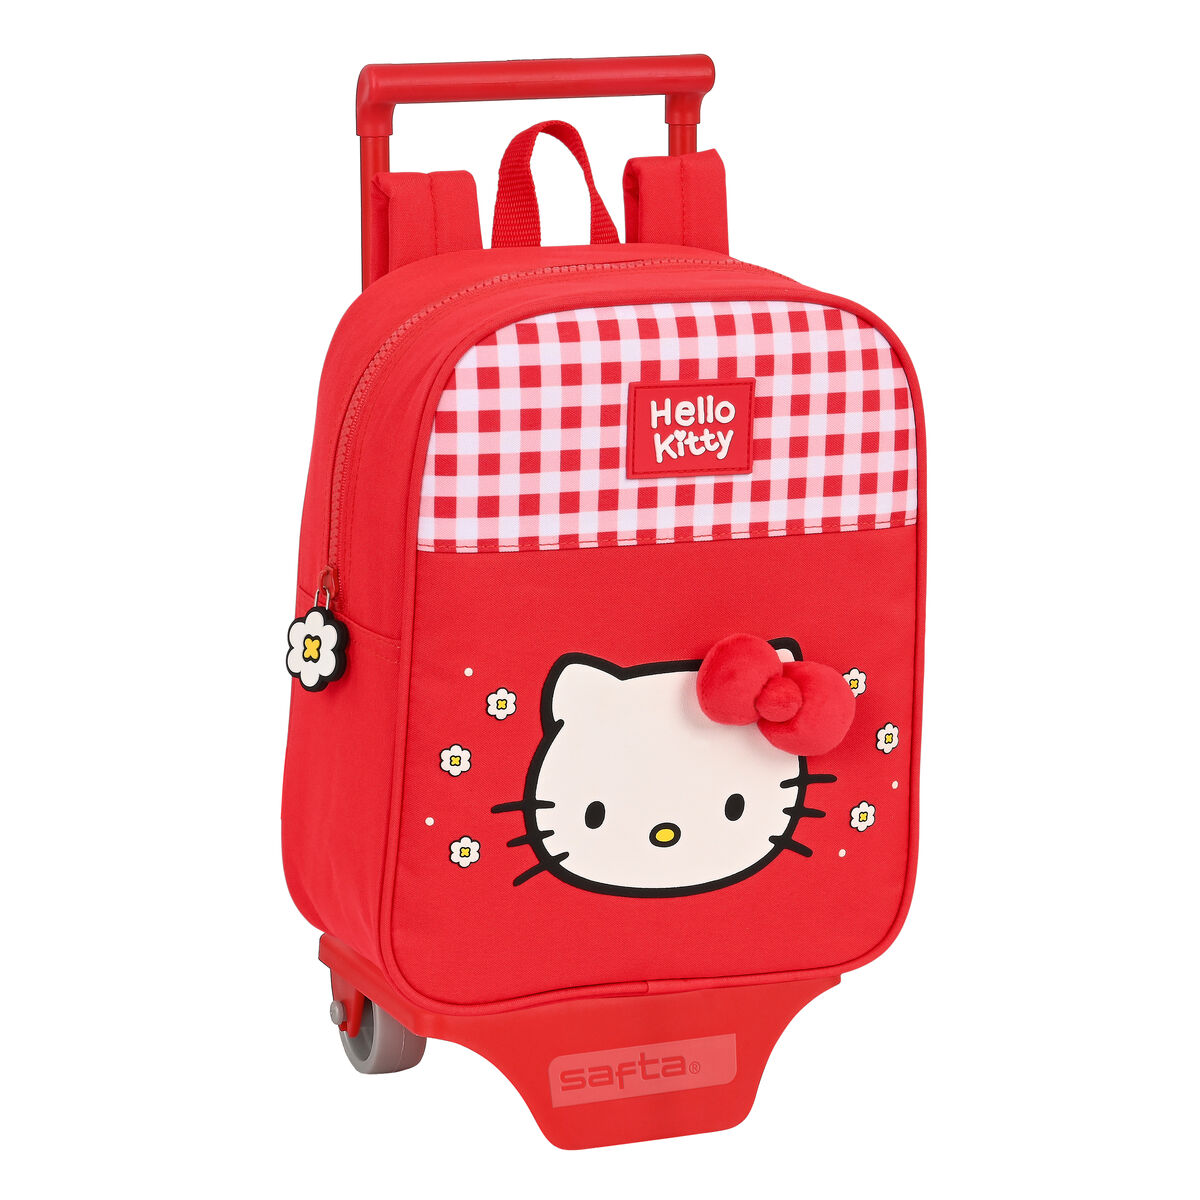 Cartable à roulettes Hello Kitty Spring Rouge (22 x 27 x 10 cm)